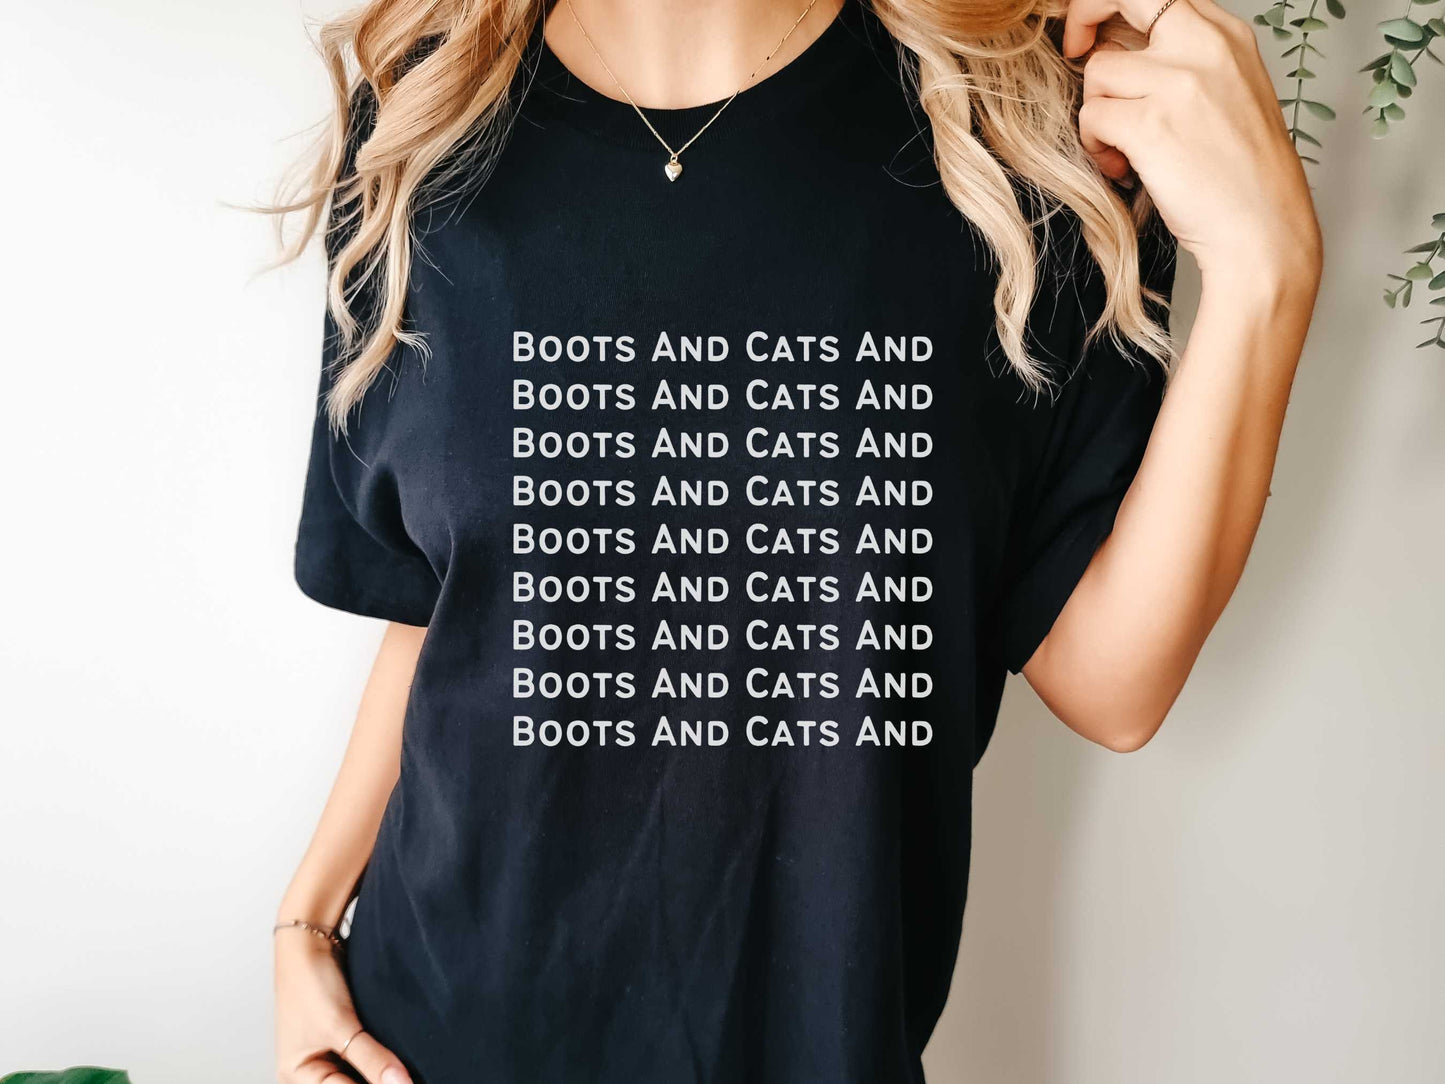 Funny Beatboxing "Boots And Cats" T-Shirt in Black